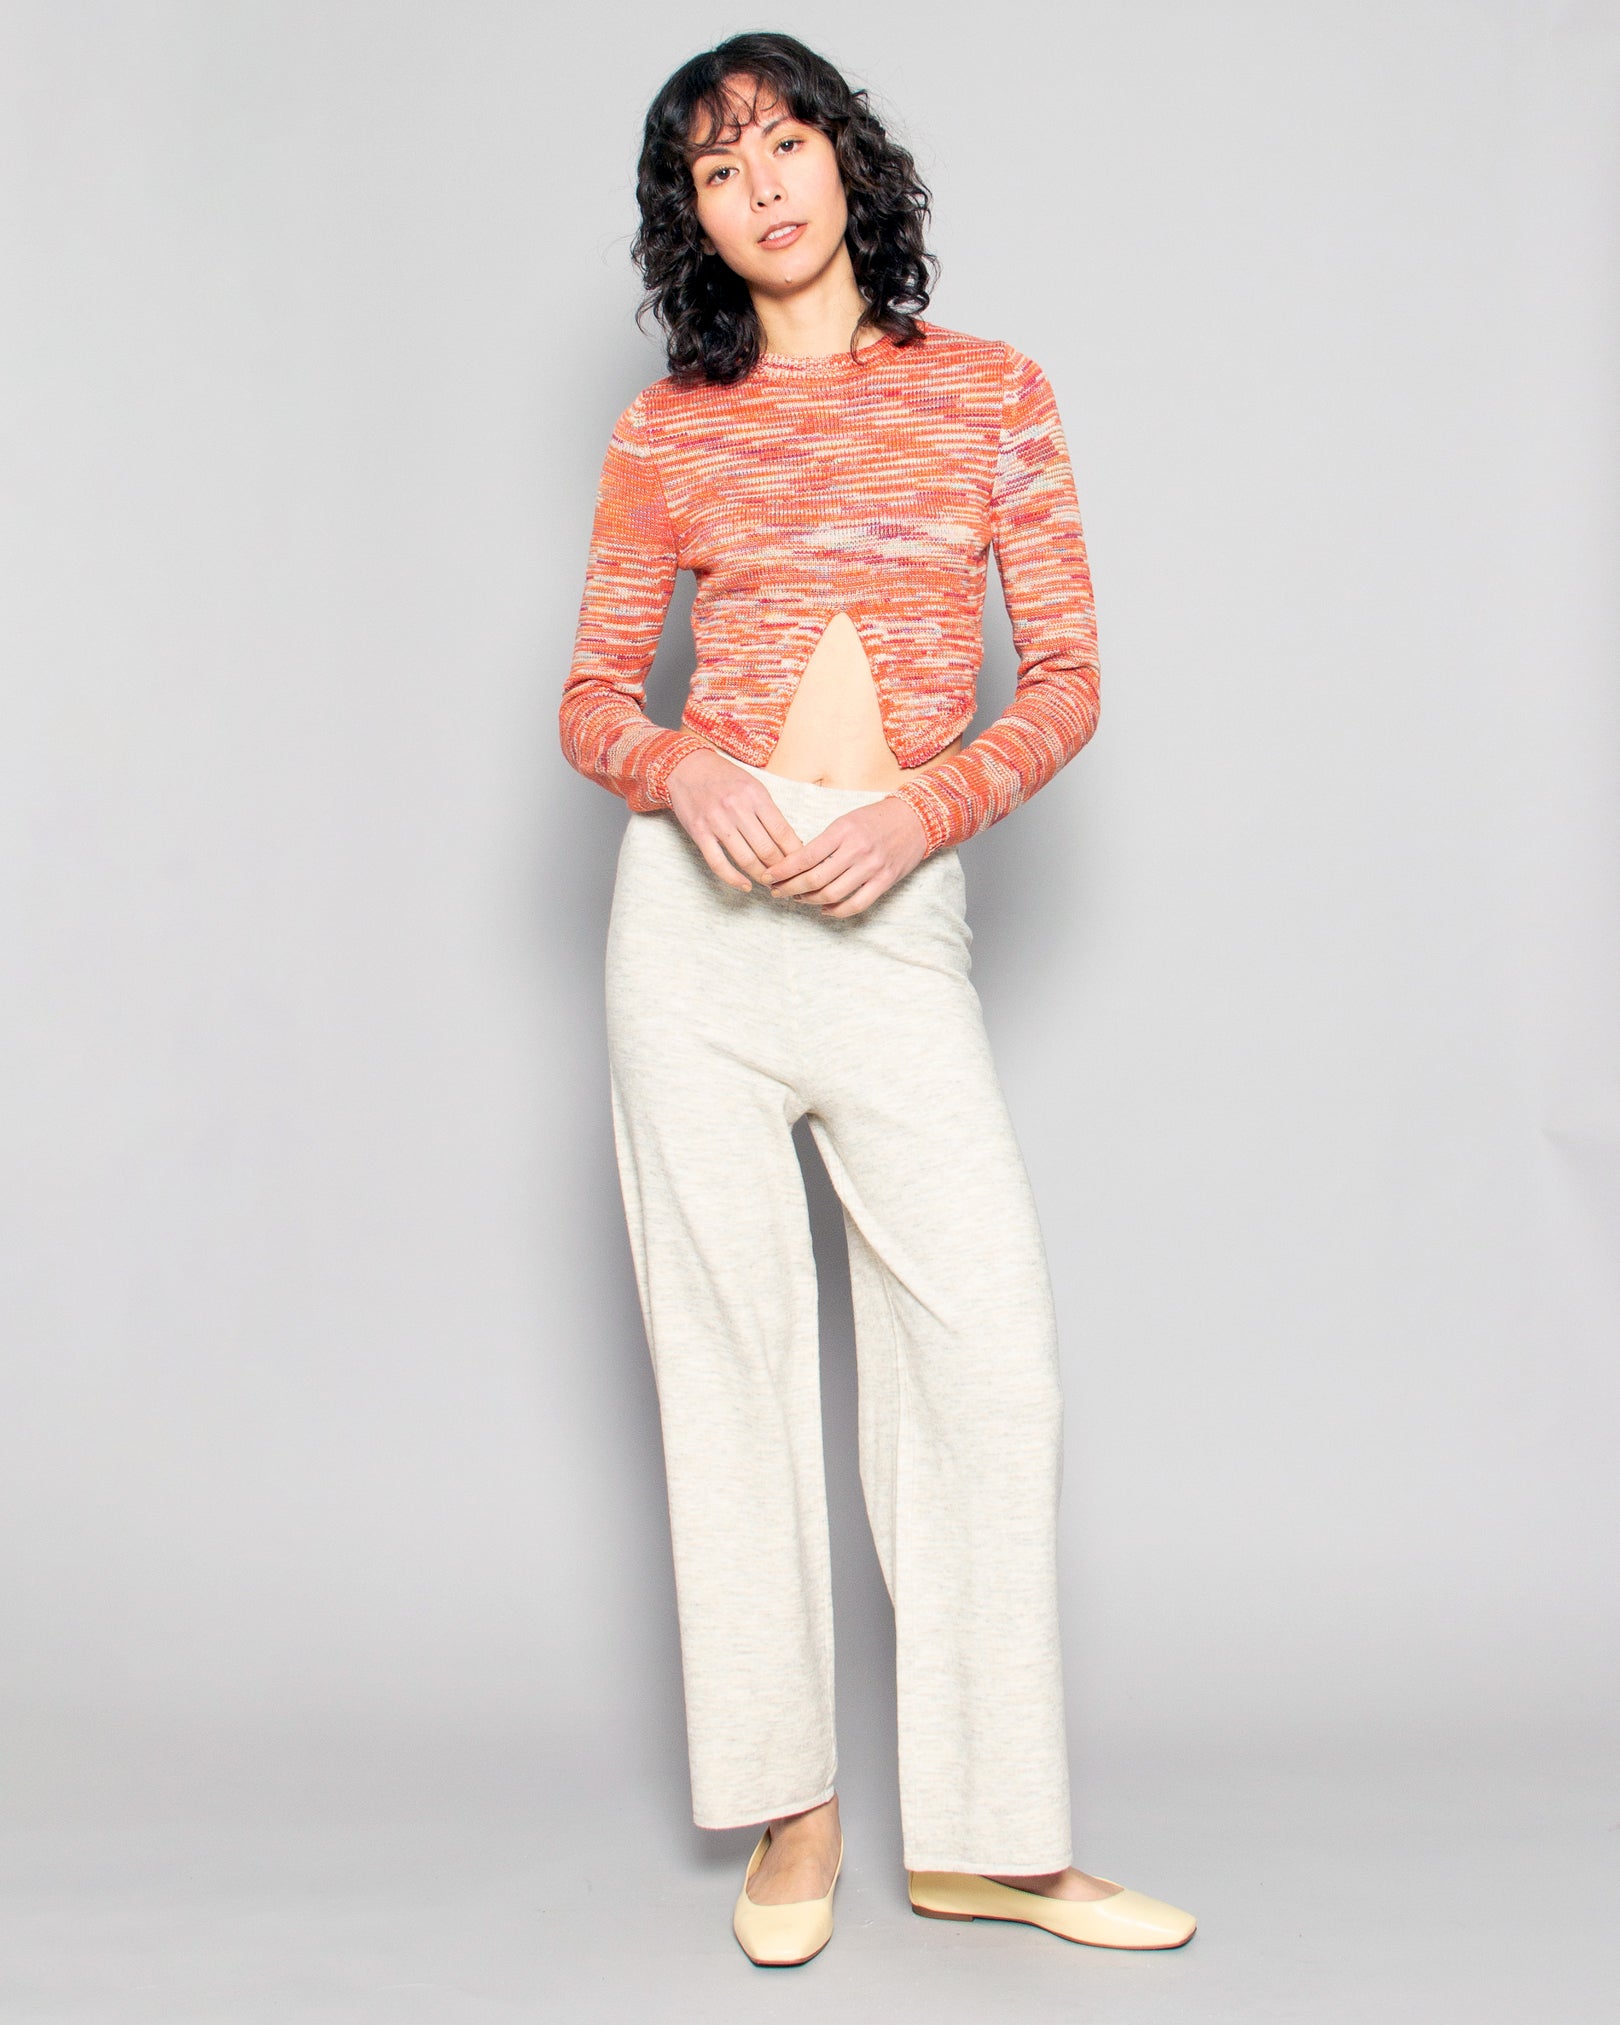 PERSONS Jonah Wide Leg Knit Pants in Heathered Cream available at Lahn.shop